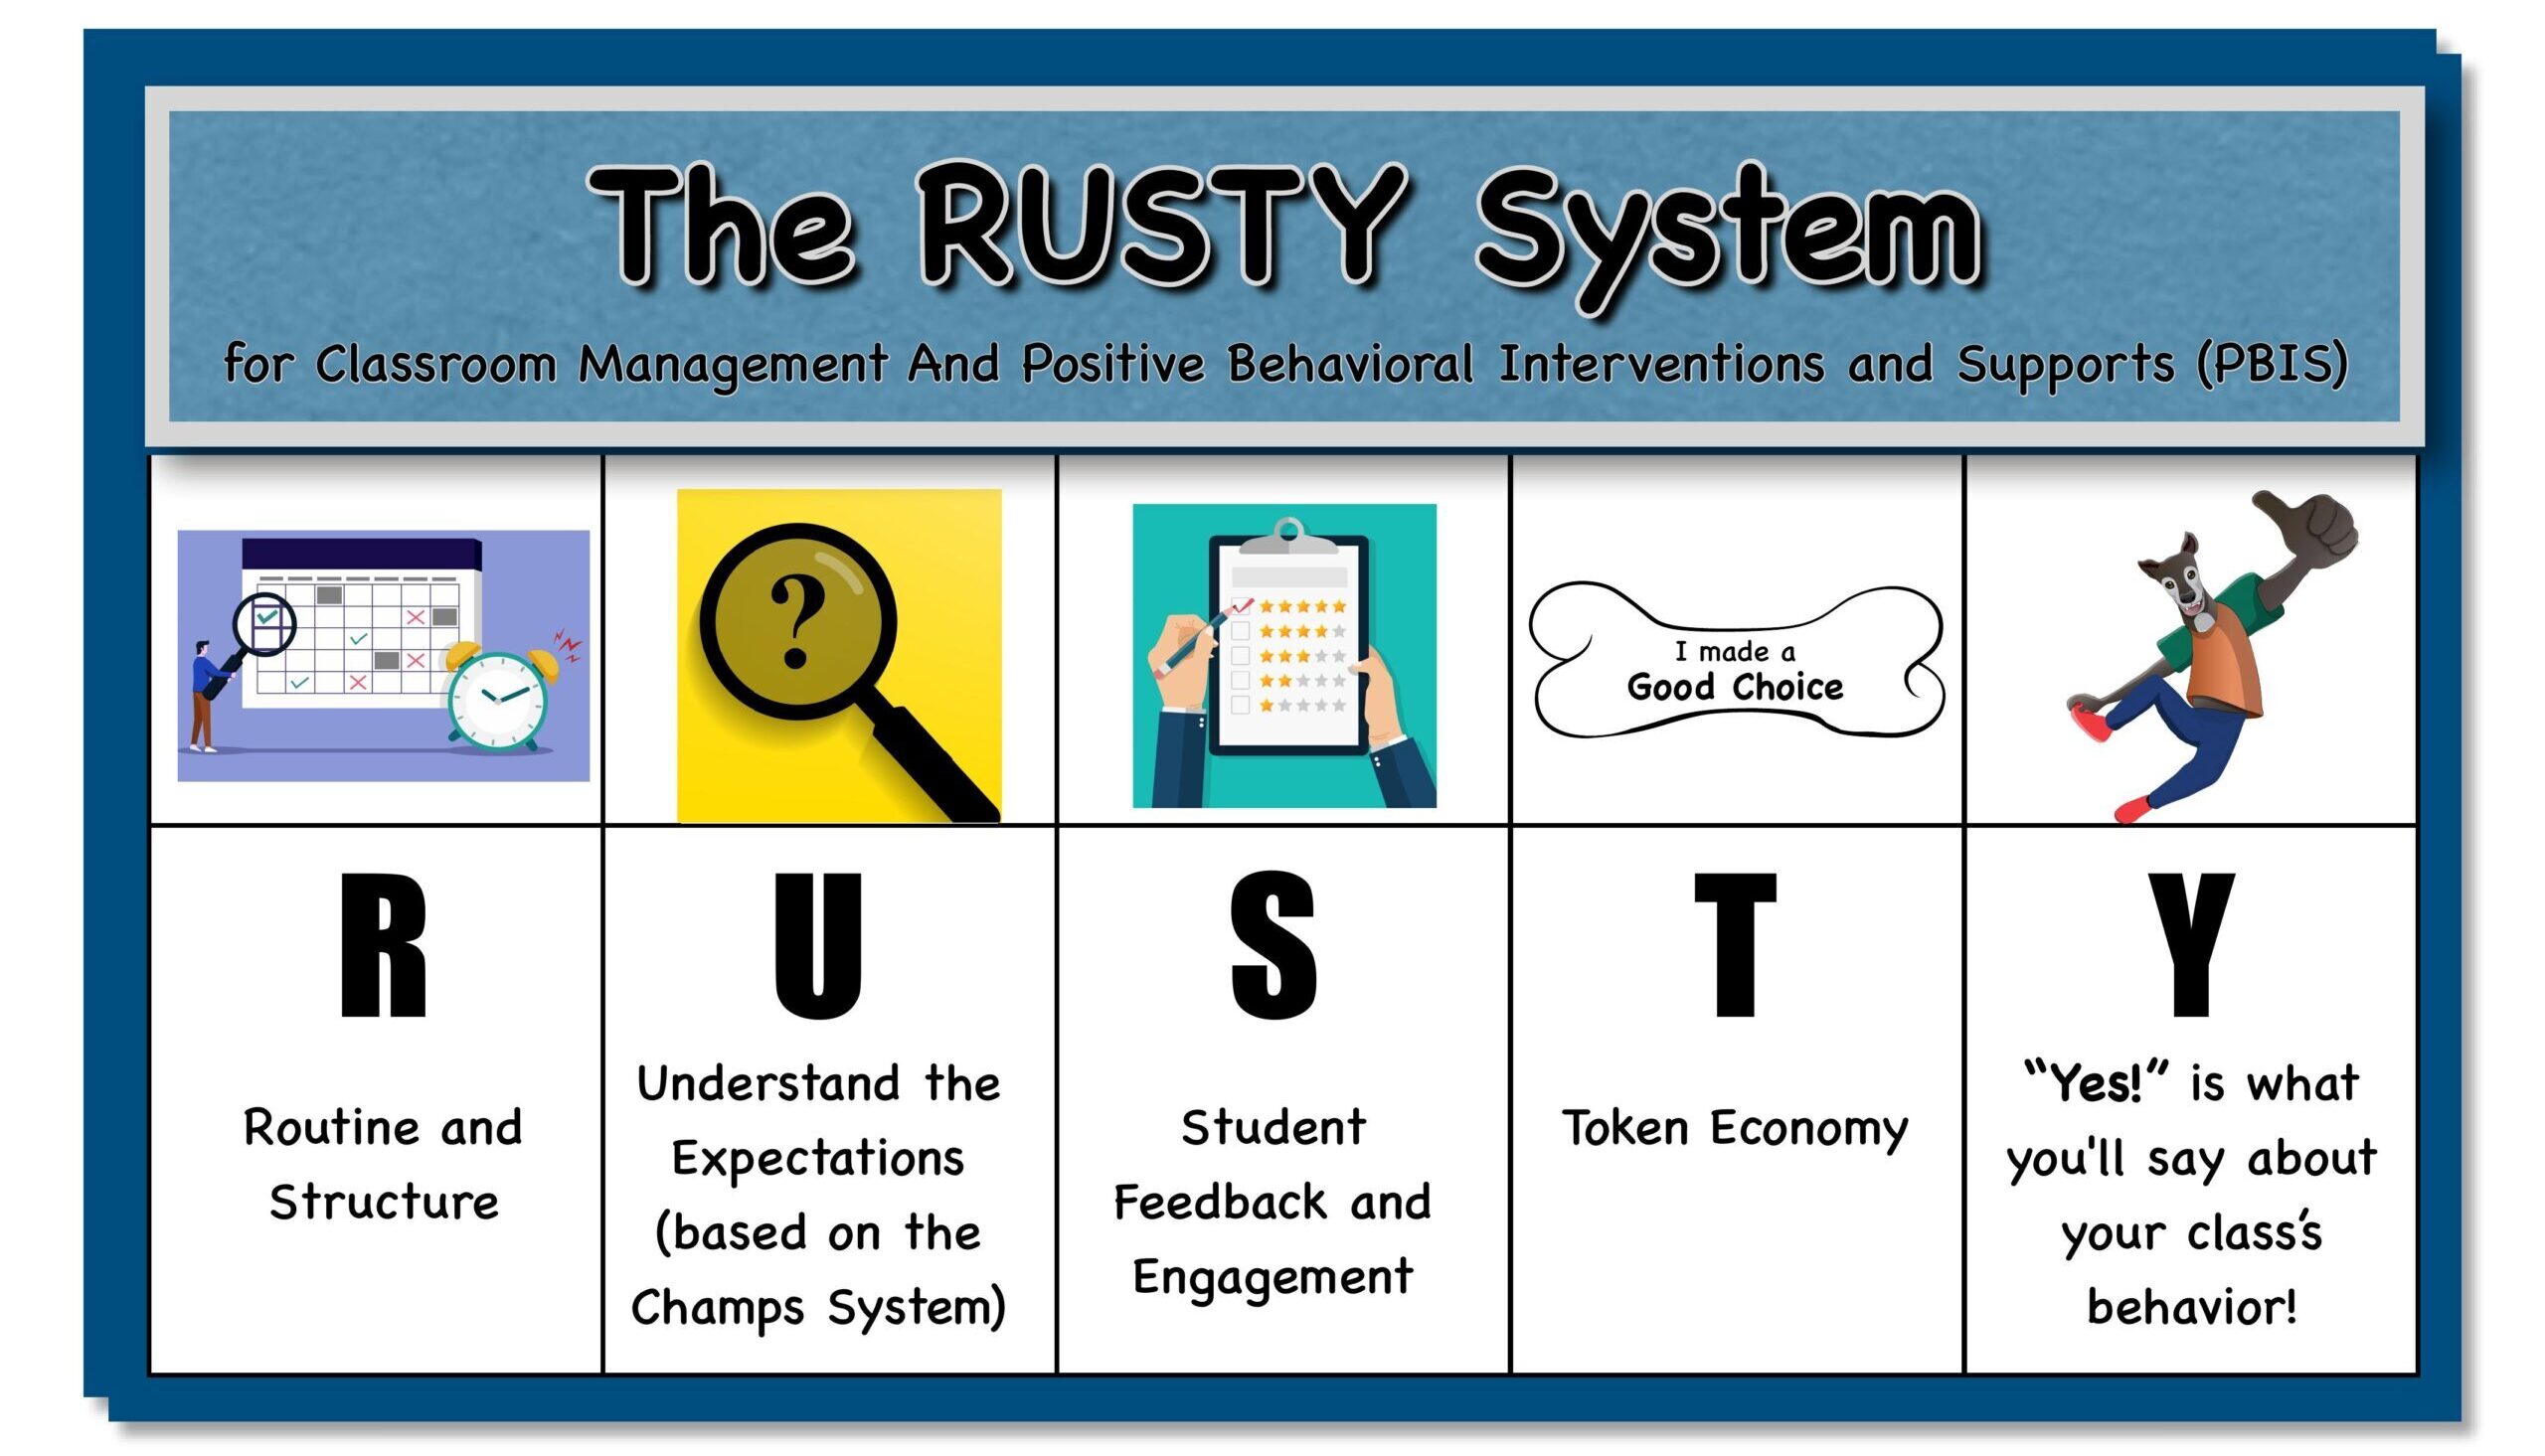 The RUSTY System